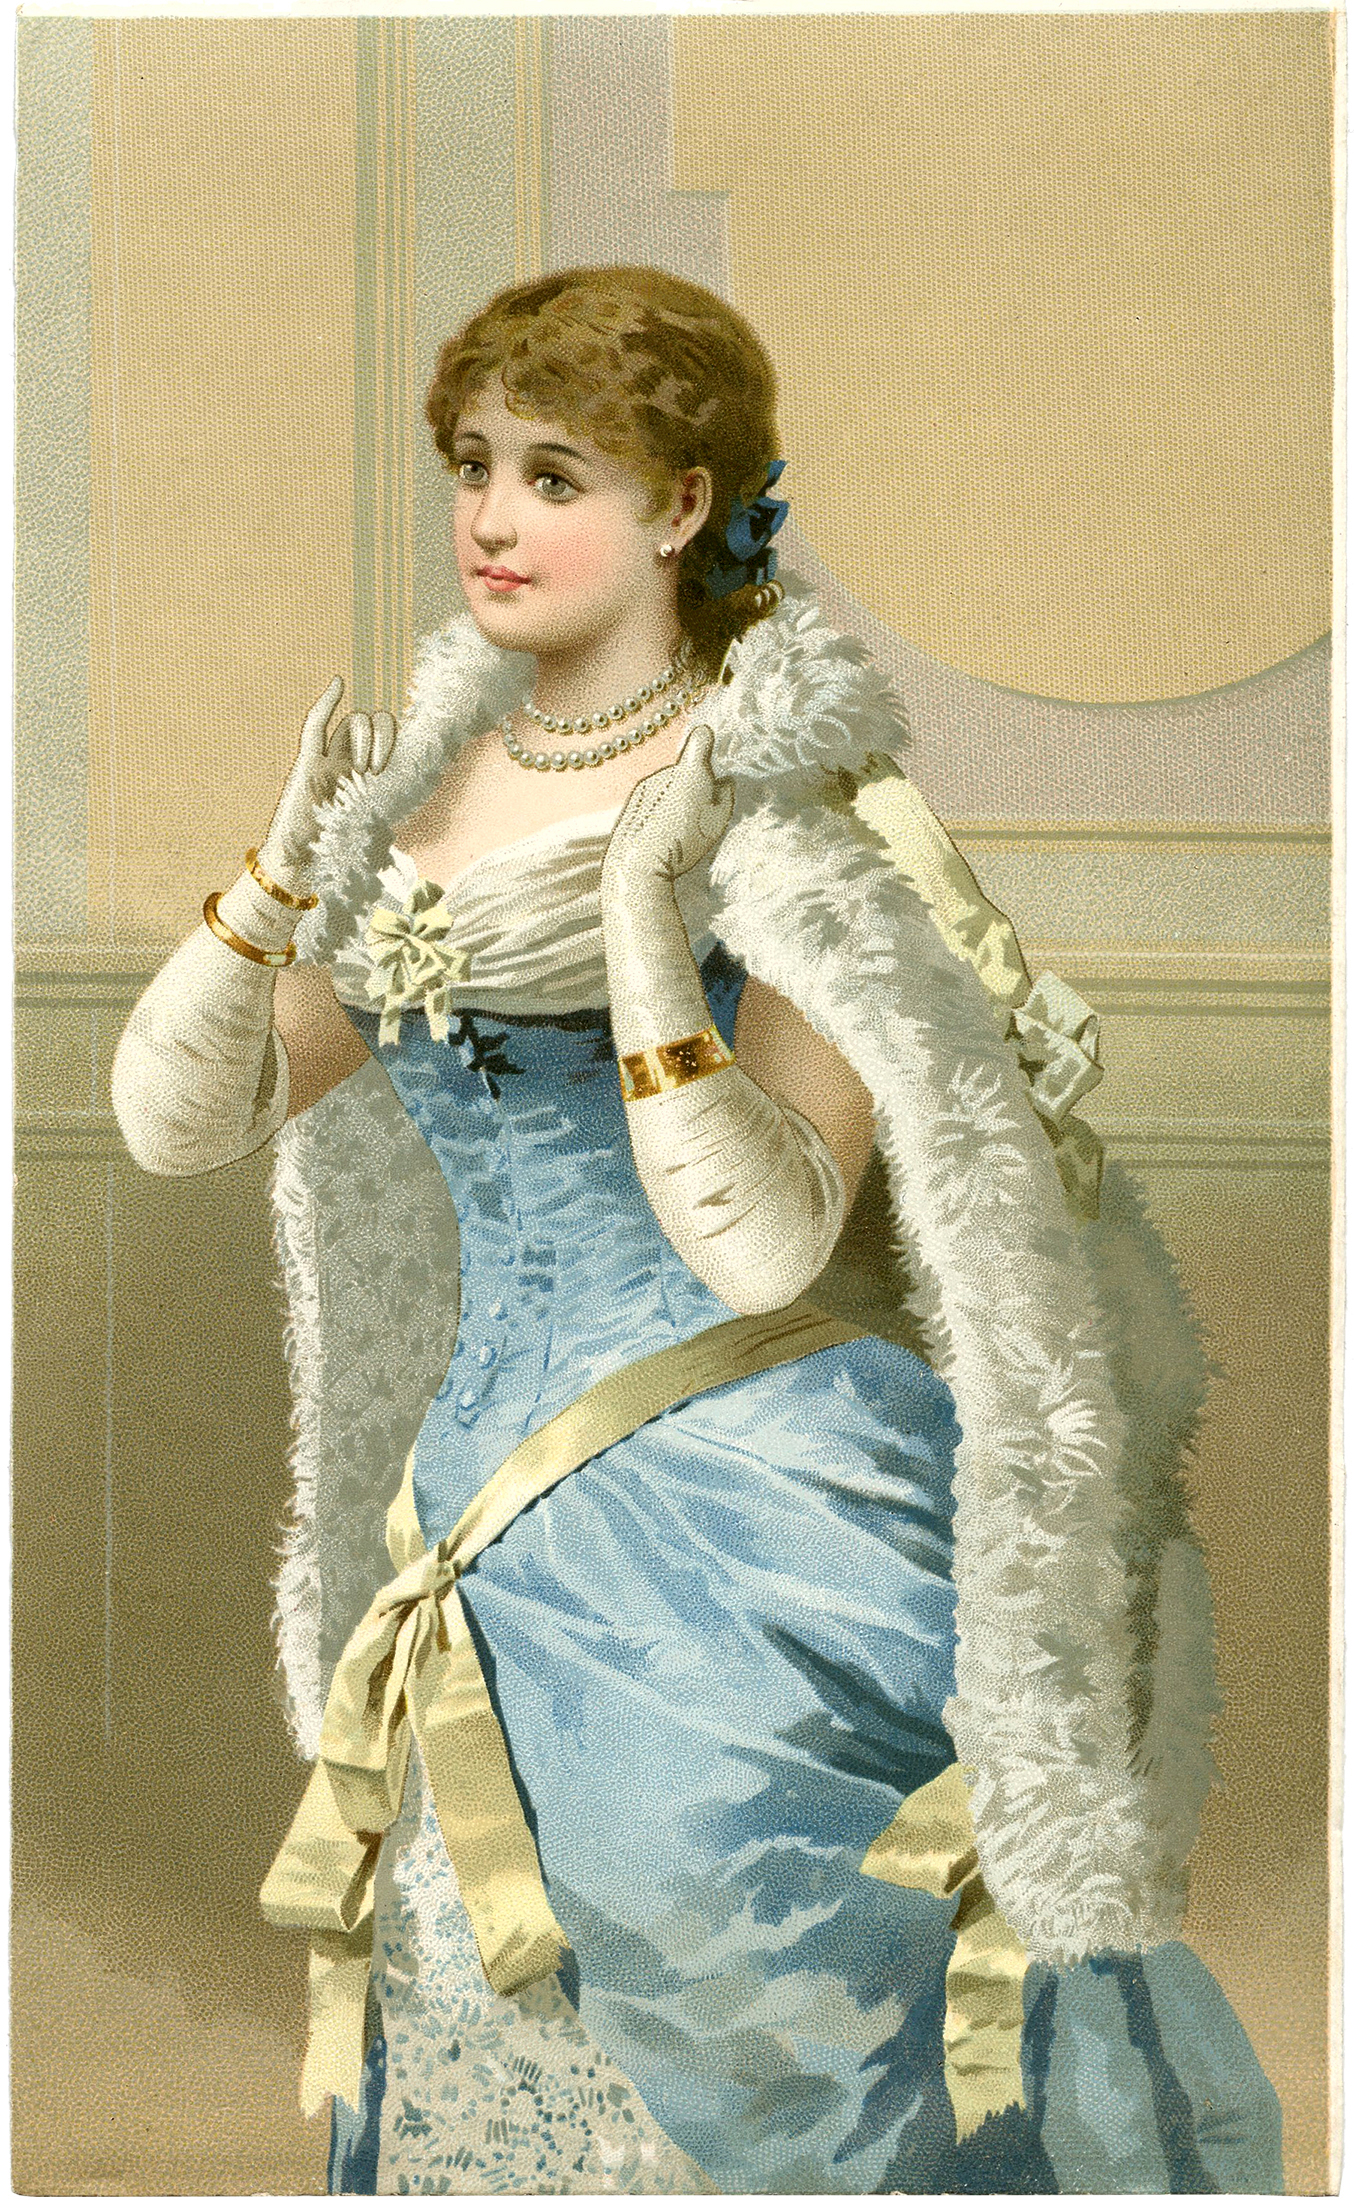 http://thegraphicsfairy.com/wp-content/uploads/2014/03/Fashion-Plate-Lady-GraphicsFairy.jpg